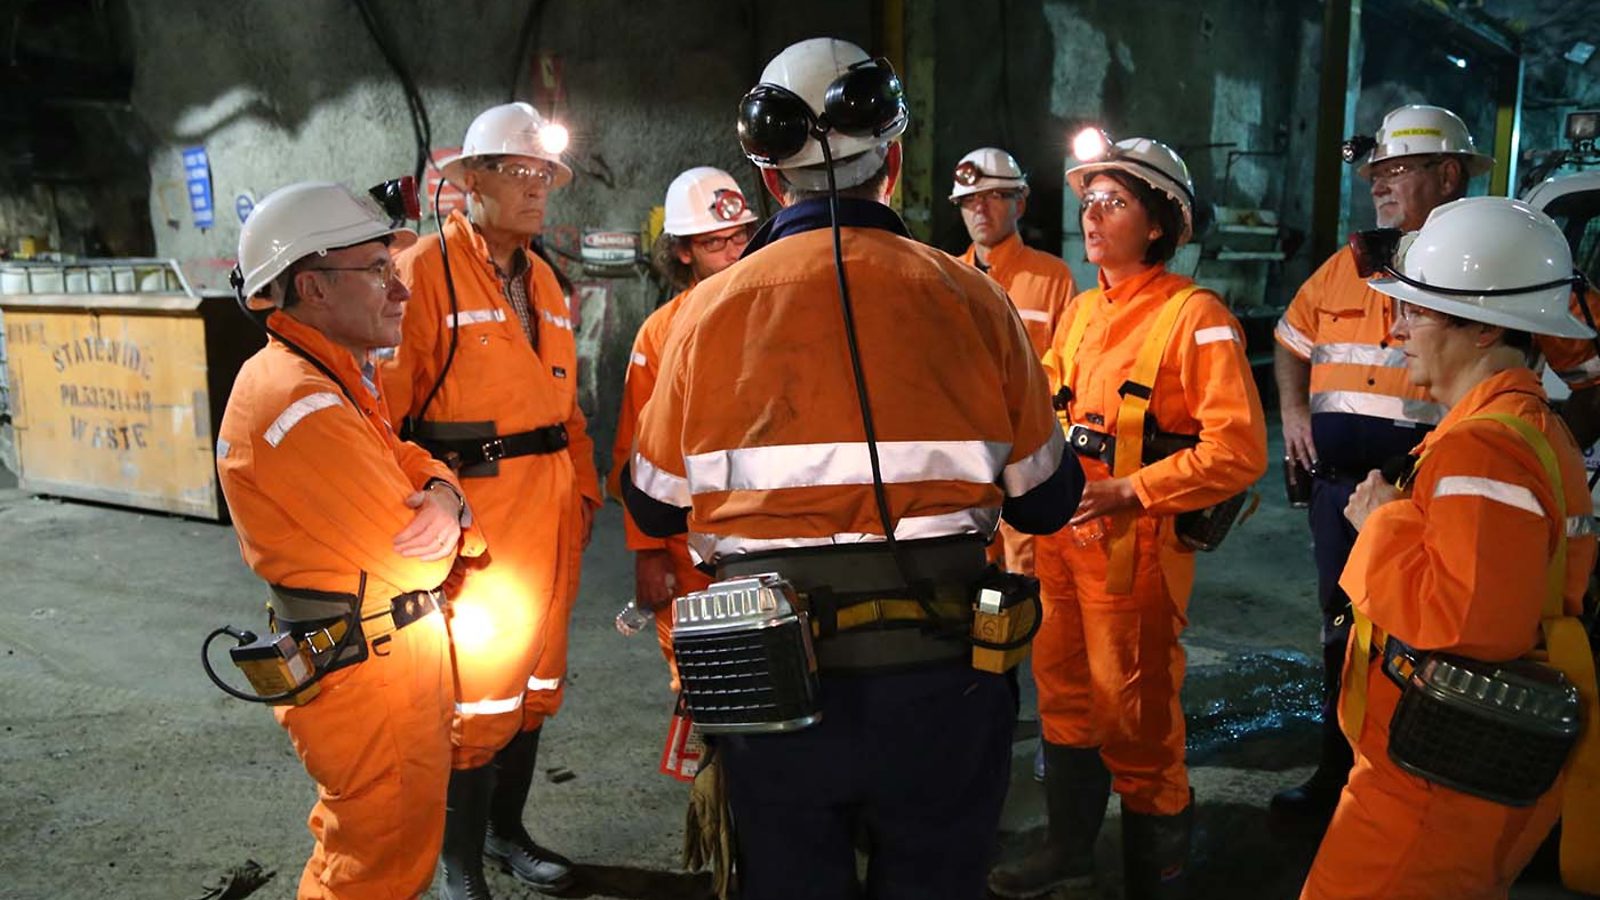 Rob Stewart of the Stawell Gold Mine (center, back turned), talks to scientists during a tour of the mine.